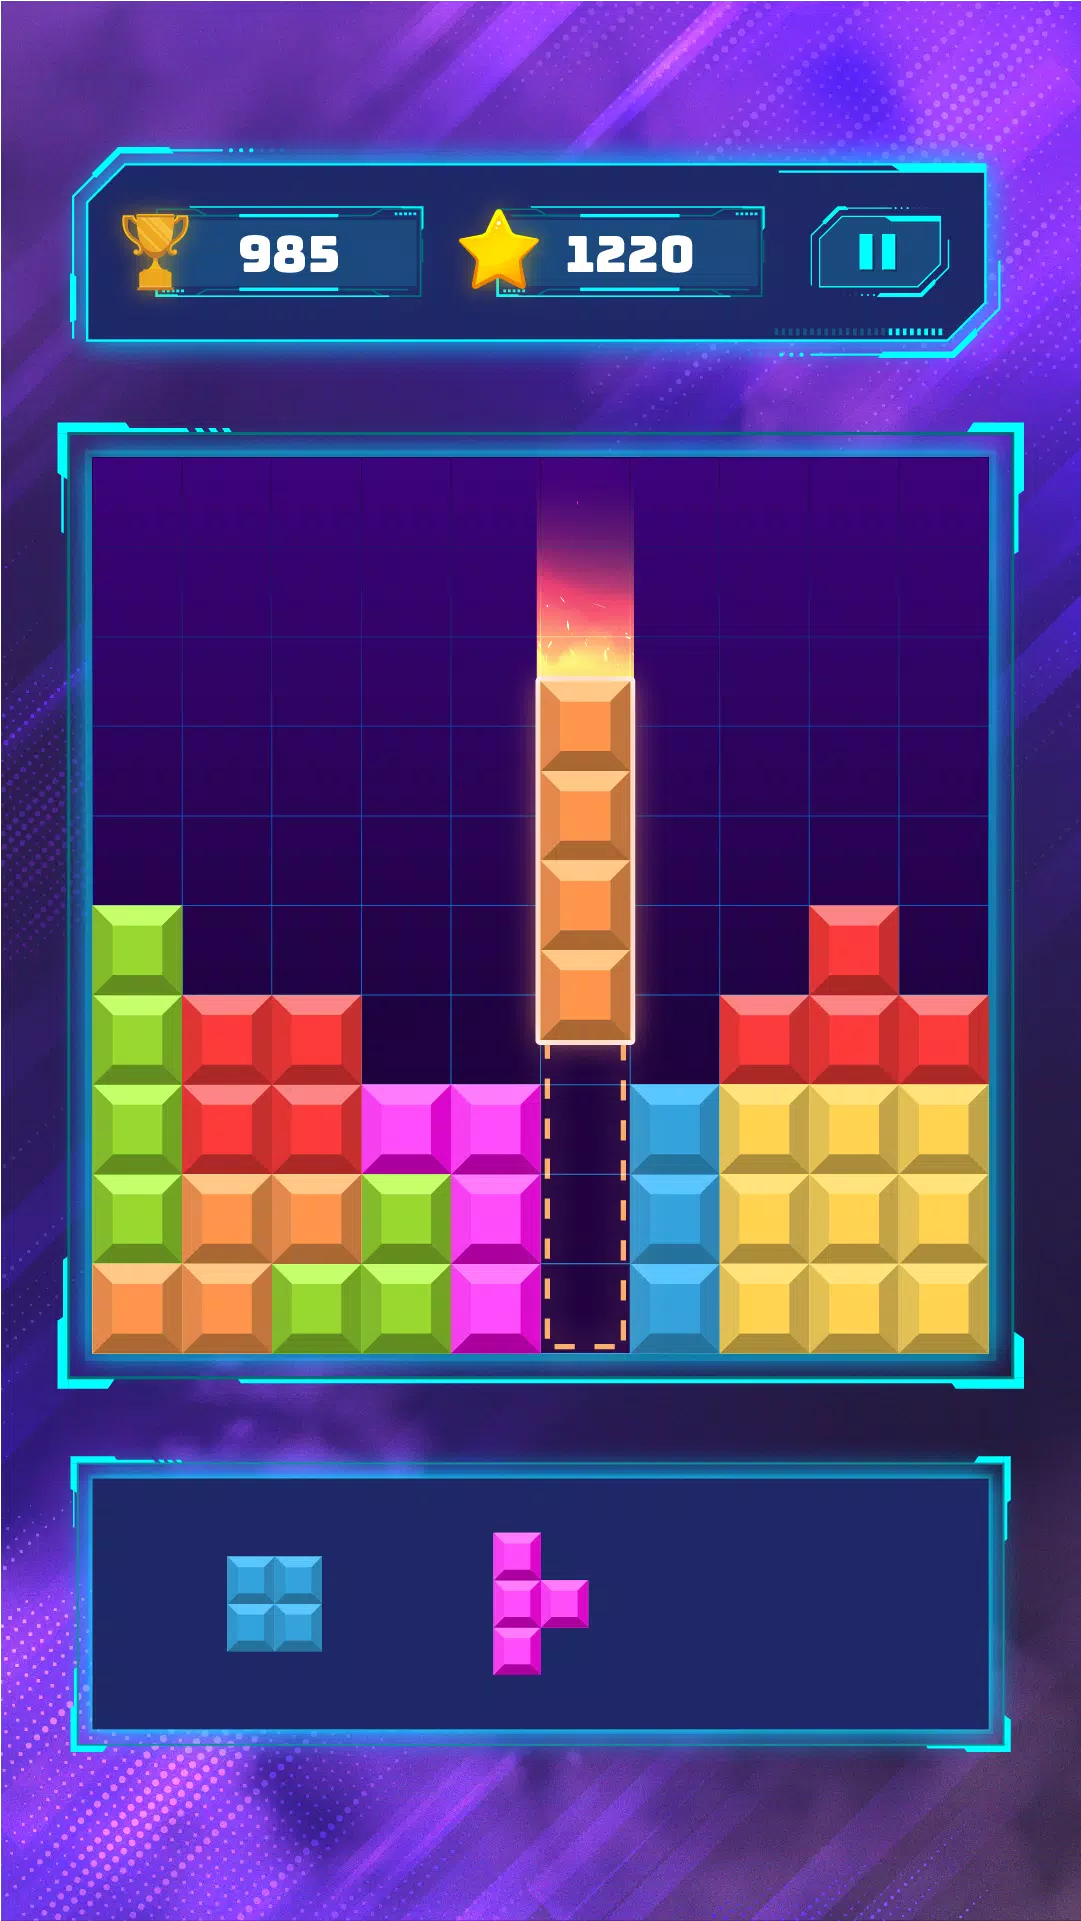 Block 1010 Puzzle: Brick Game for Android - APK Download